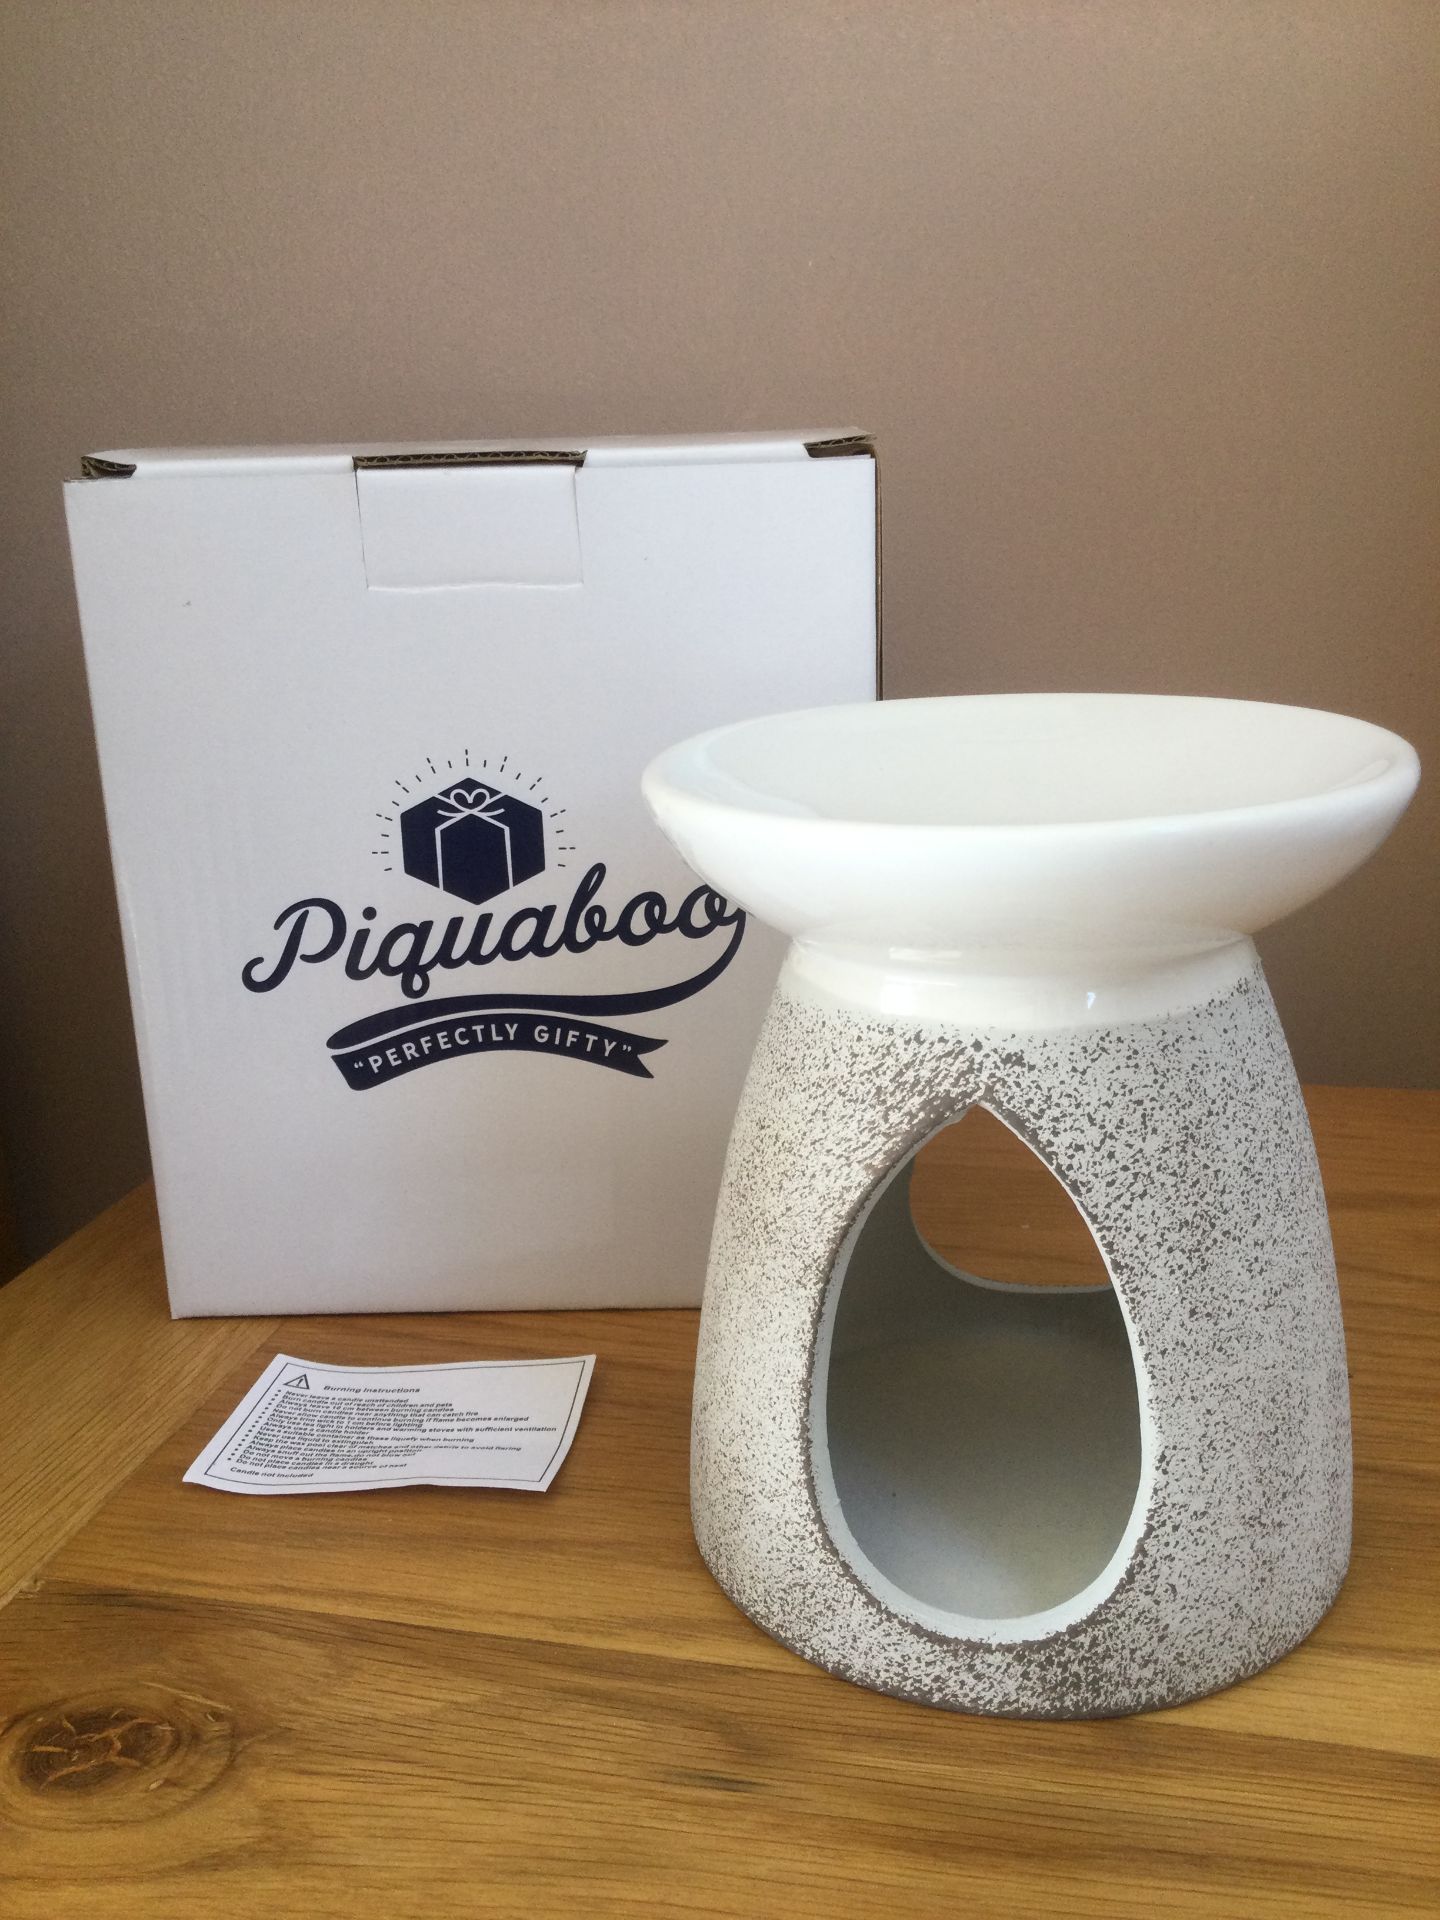 Piquaboo Large “Rustic White” Ceramic Oil Burner Height 13cm, New With Gift Box - Image 2 of 3